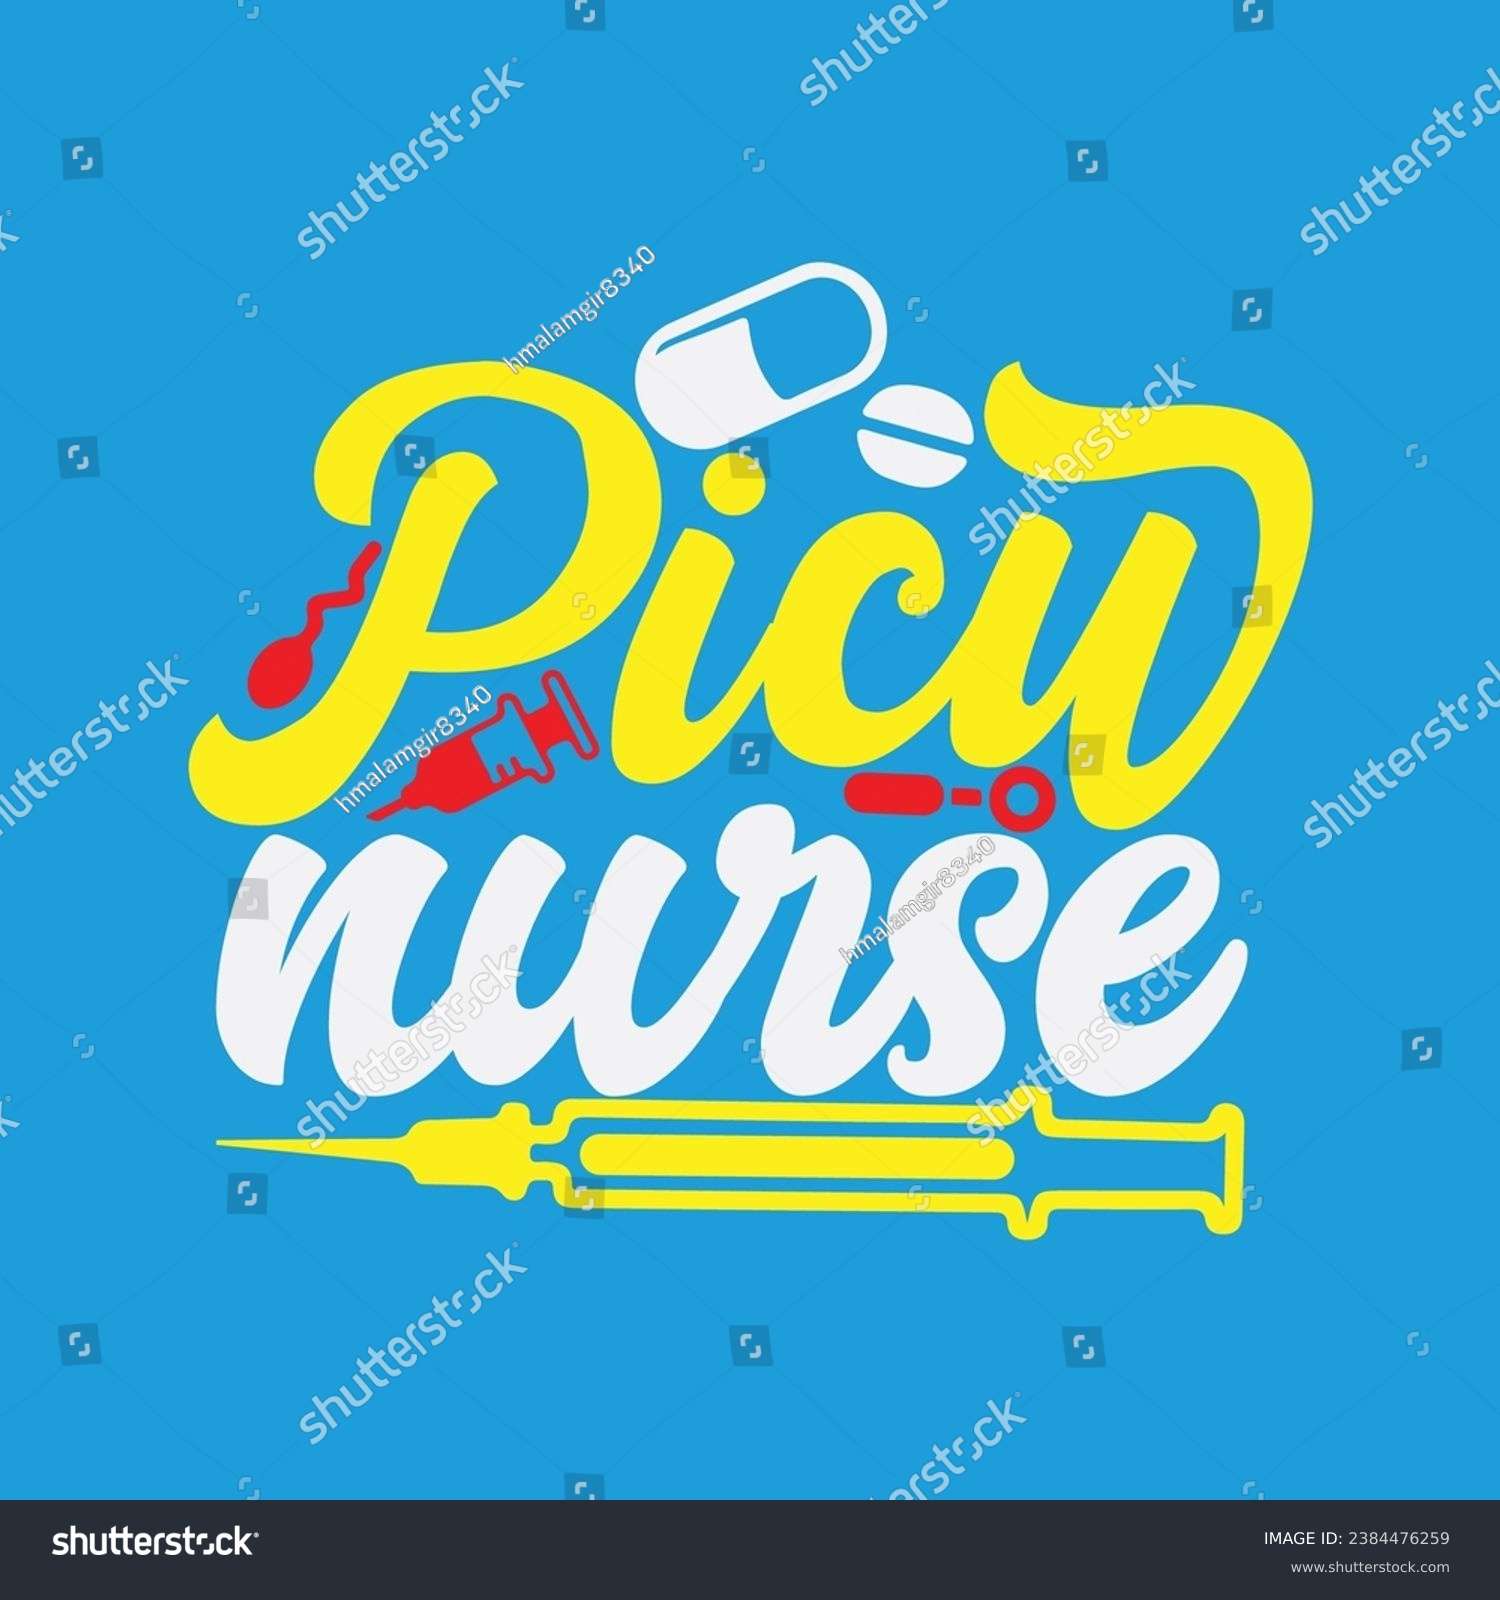 SVG of Picu nurse t-shirt design. Here You Can find and Buy t-Shirt Design. Digital Files for yourself, friends and family, or anyone who supports your Special Day and Occasions. svg